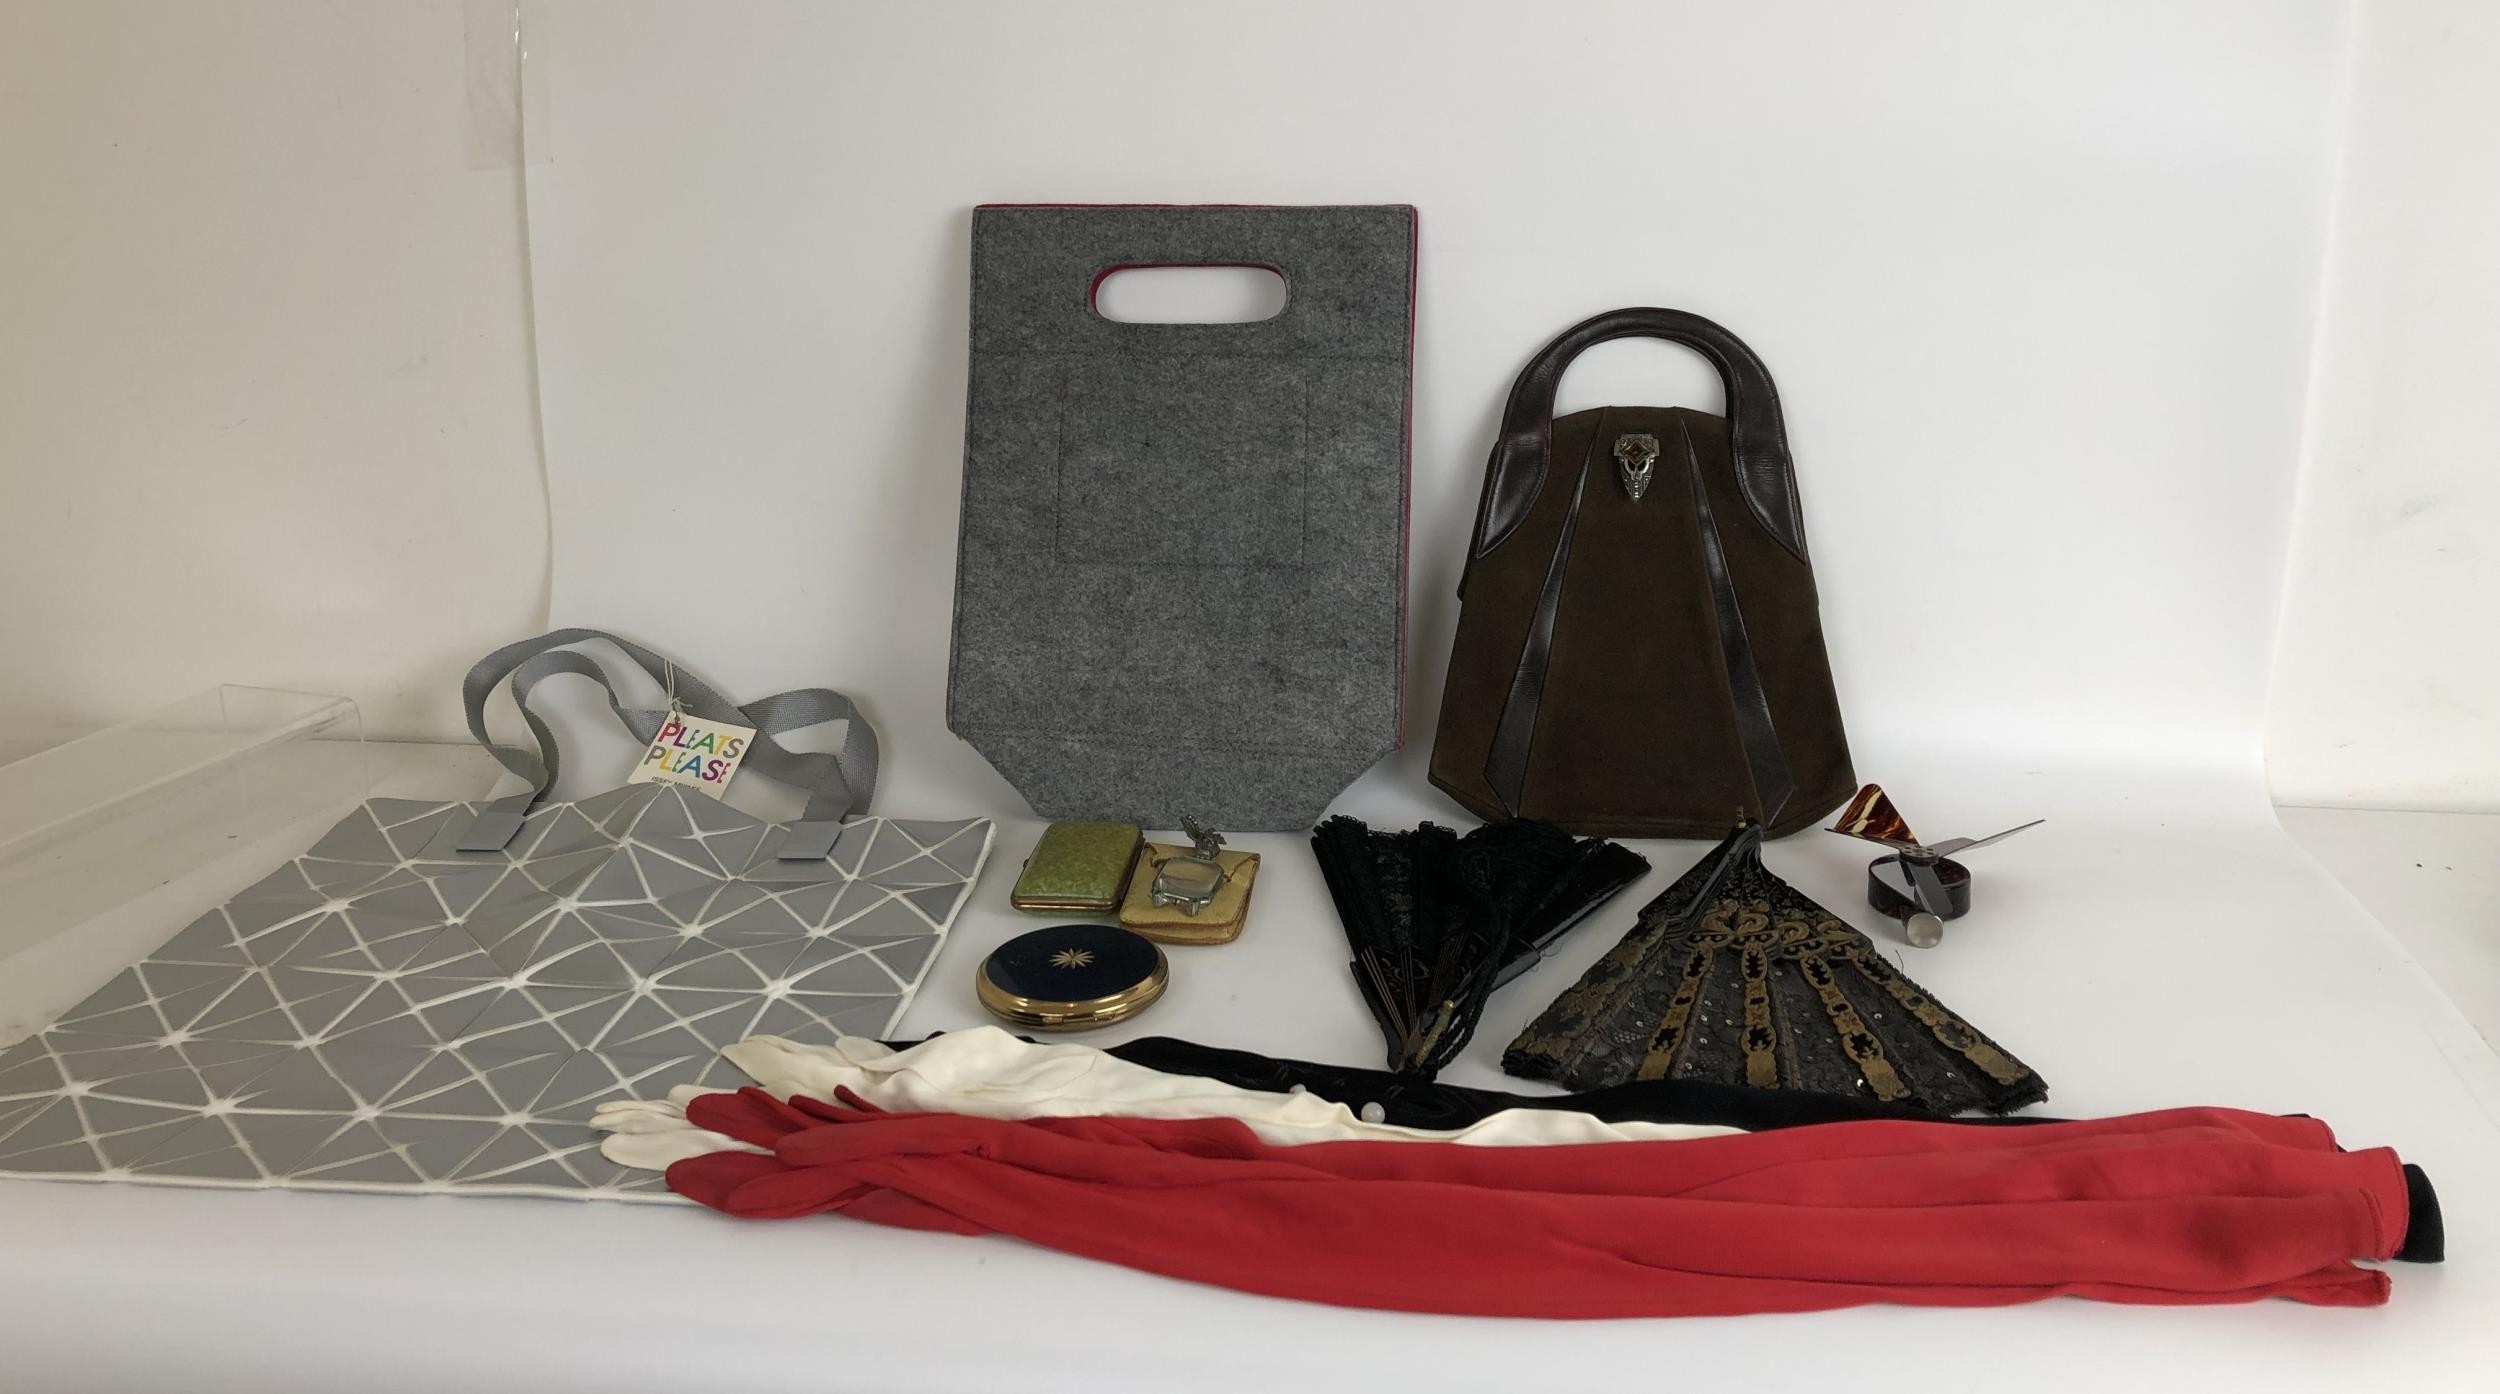 An Art Deco style handbag, two fans, and assorted other fashion textiles (box)